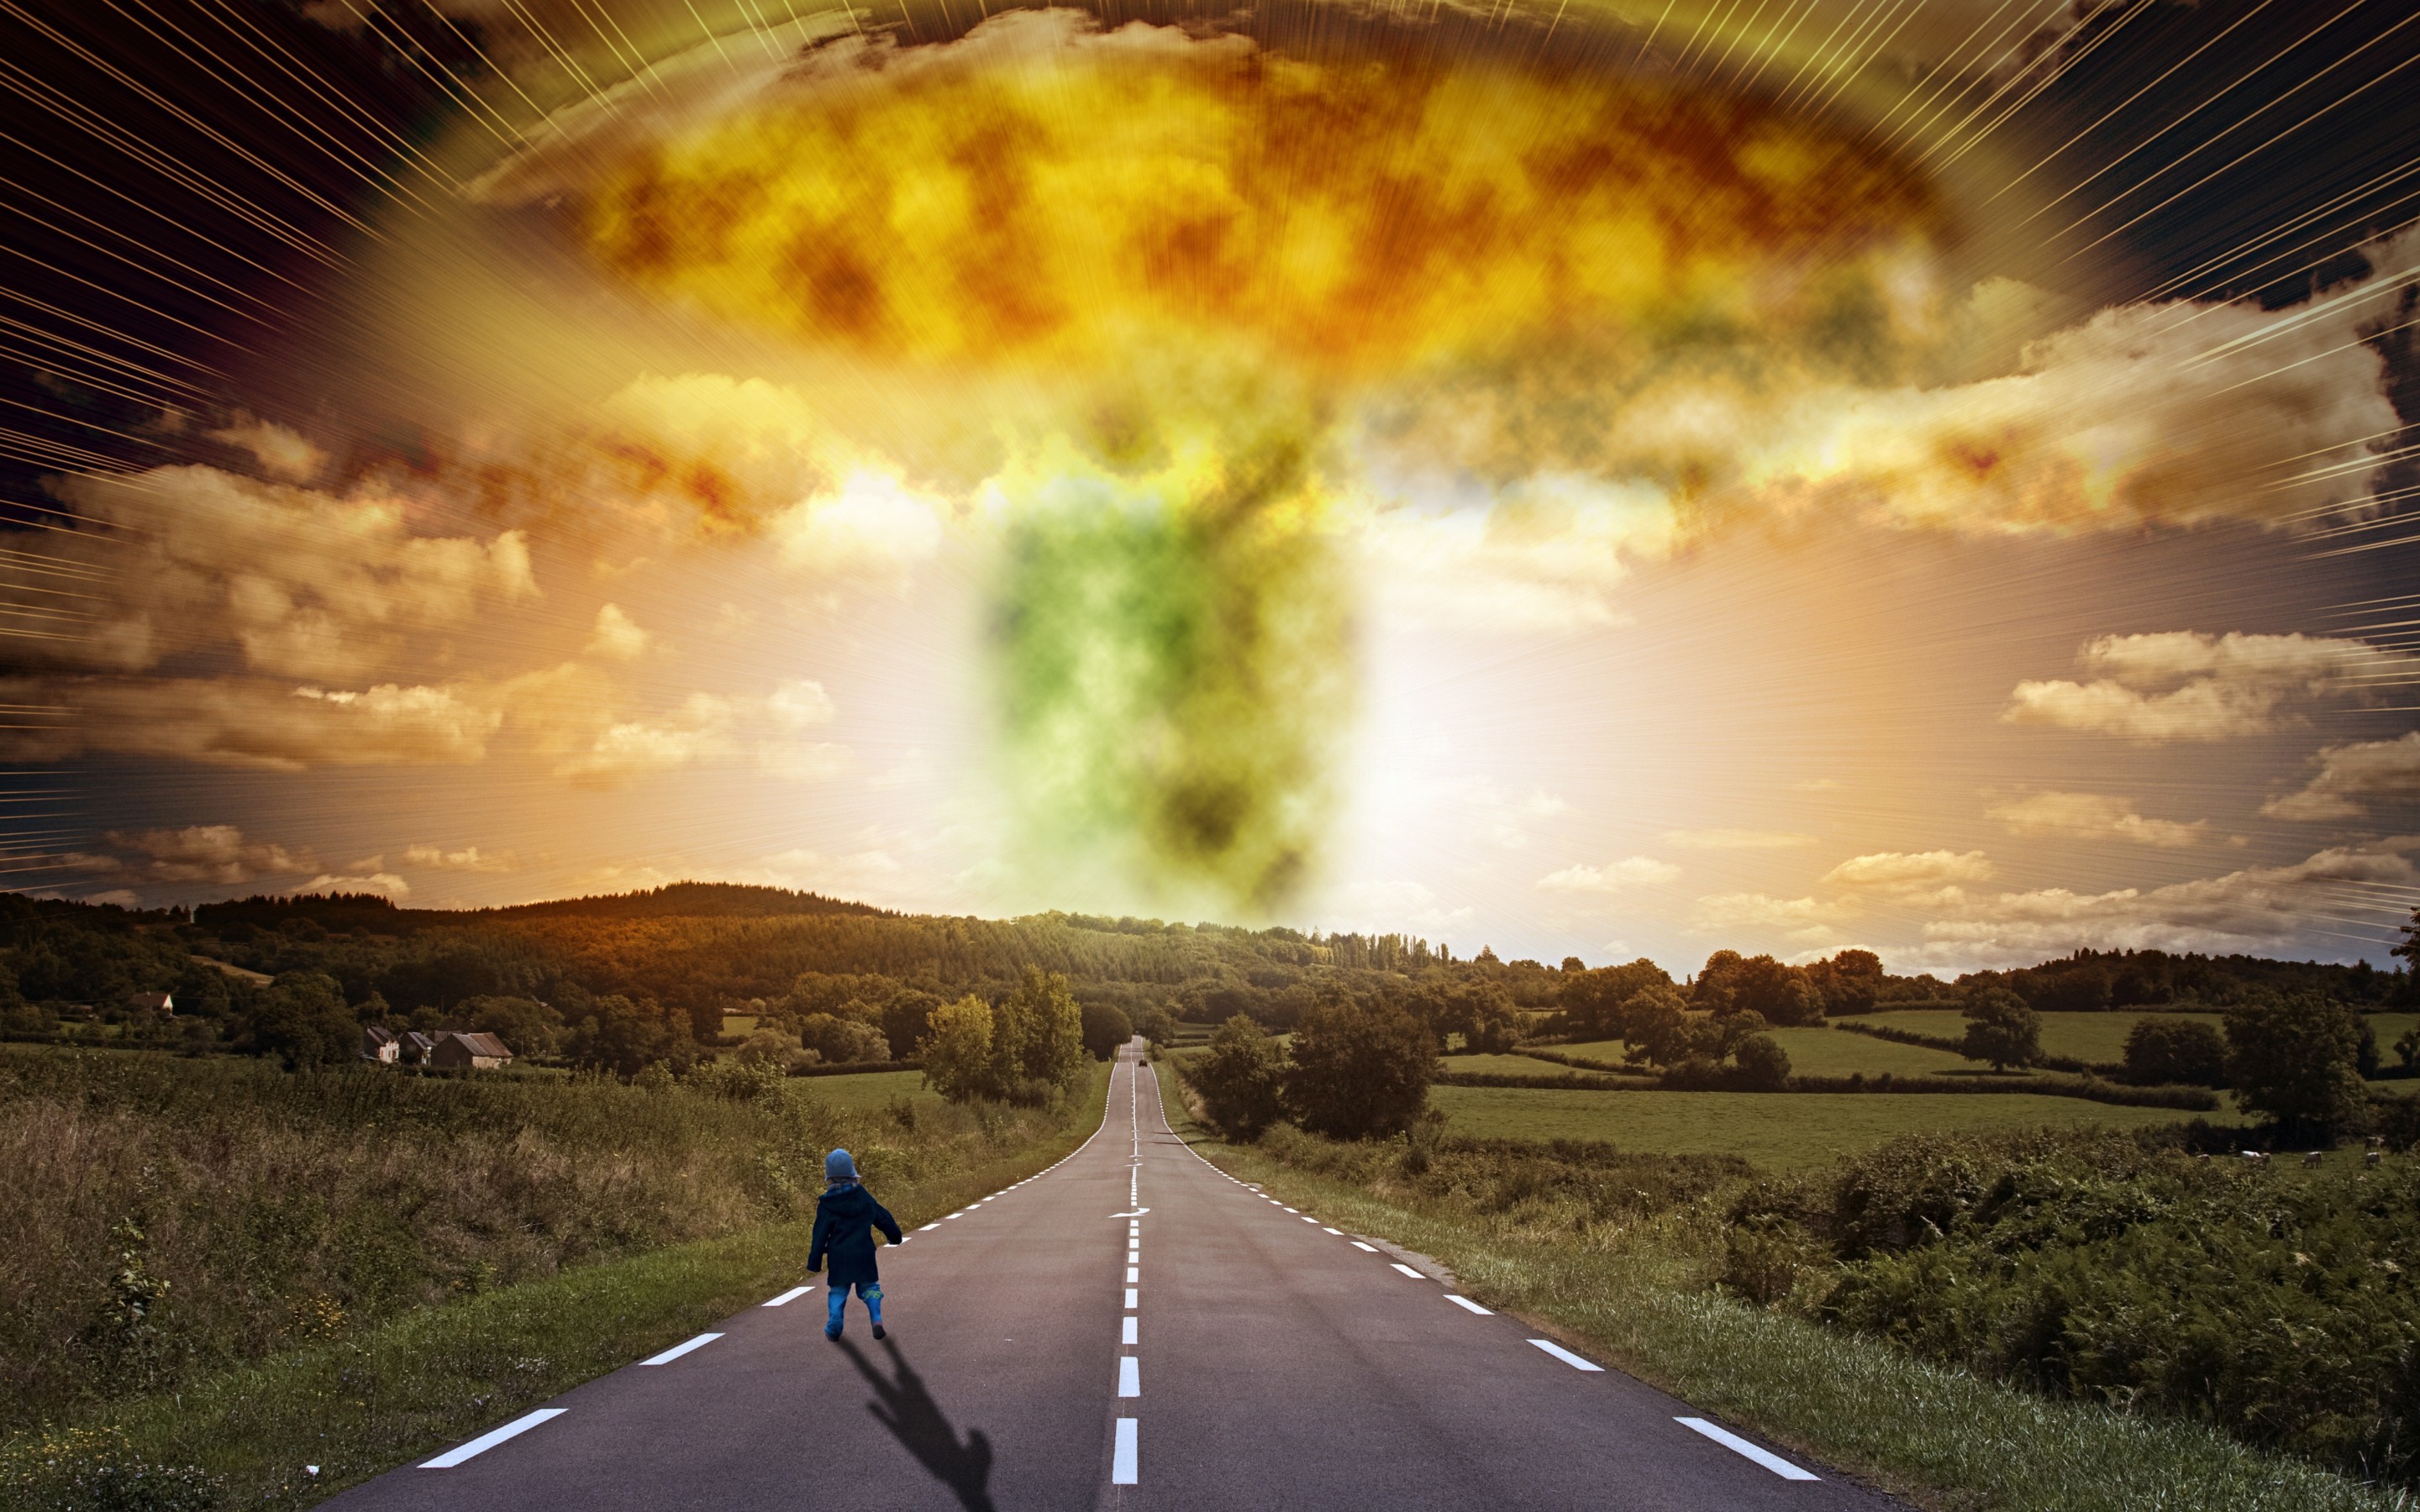 Road child explosion apocalypse signs houses trees apocalyptic nuclear radiation bomb wallpaper